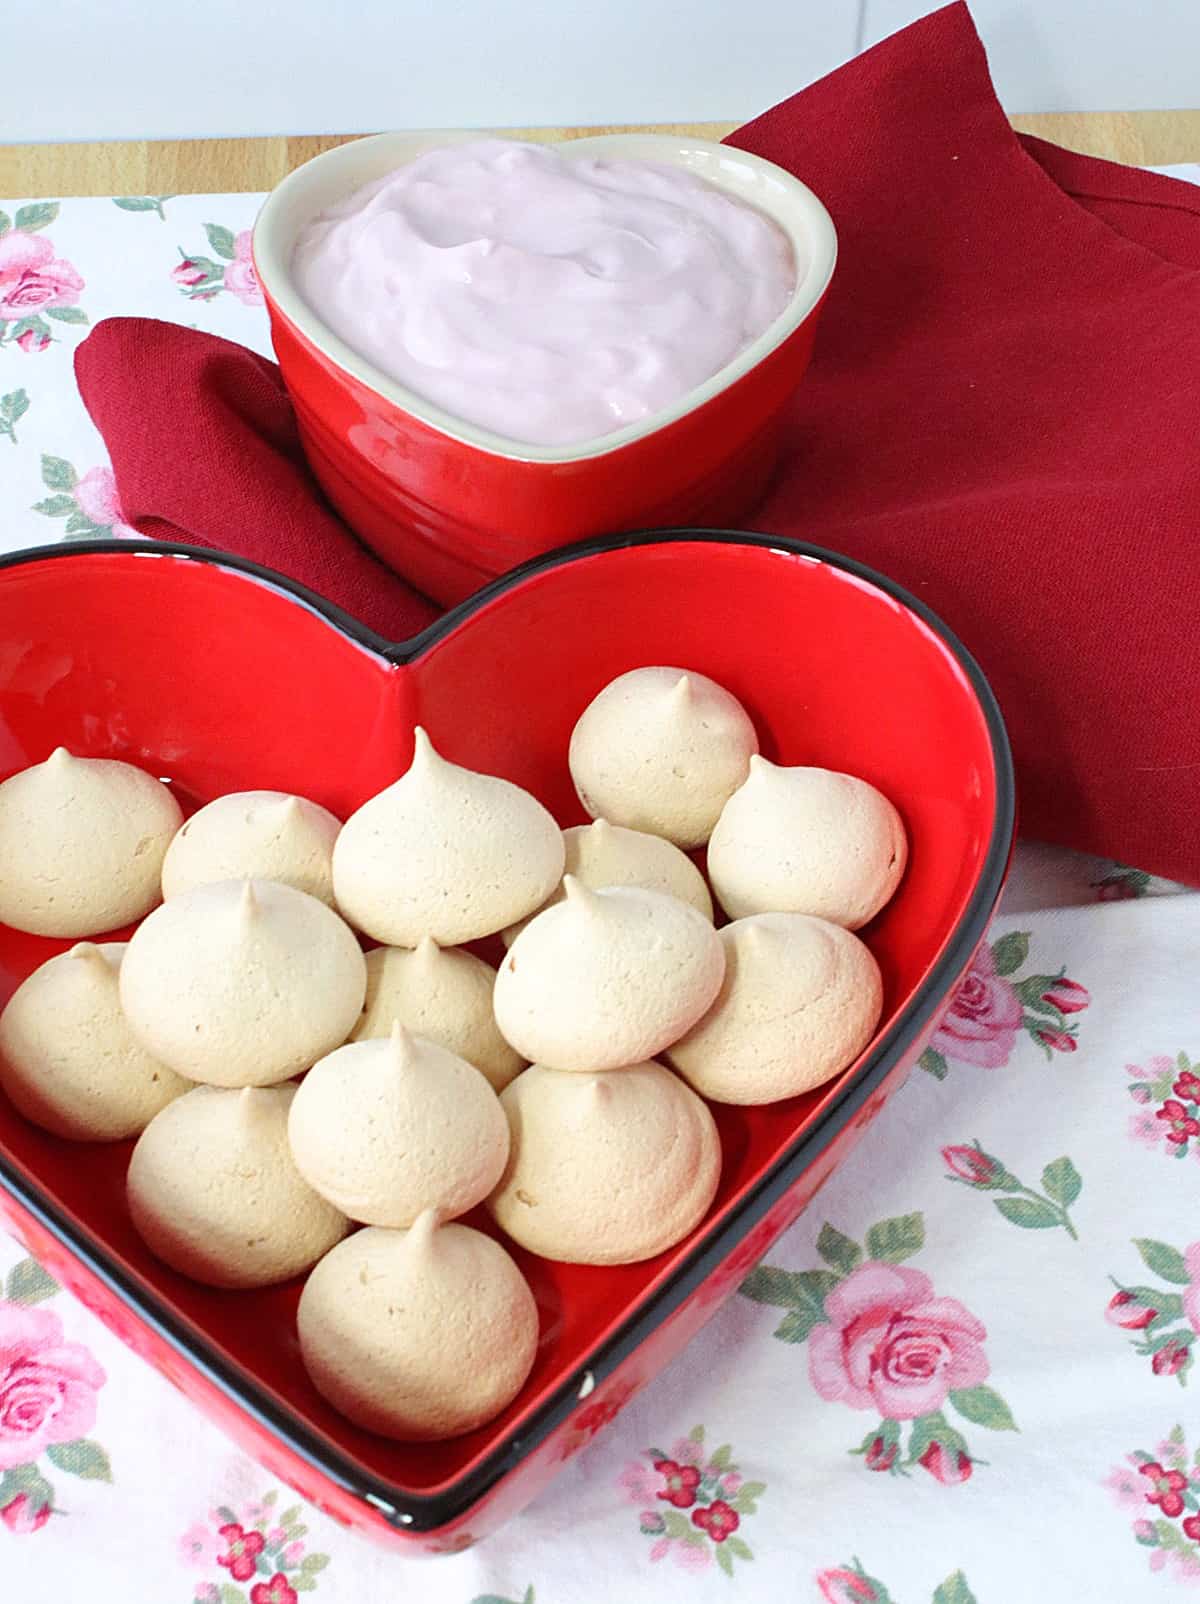 A heart-shaped red bowl filled with Almond Meringue Cookies.